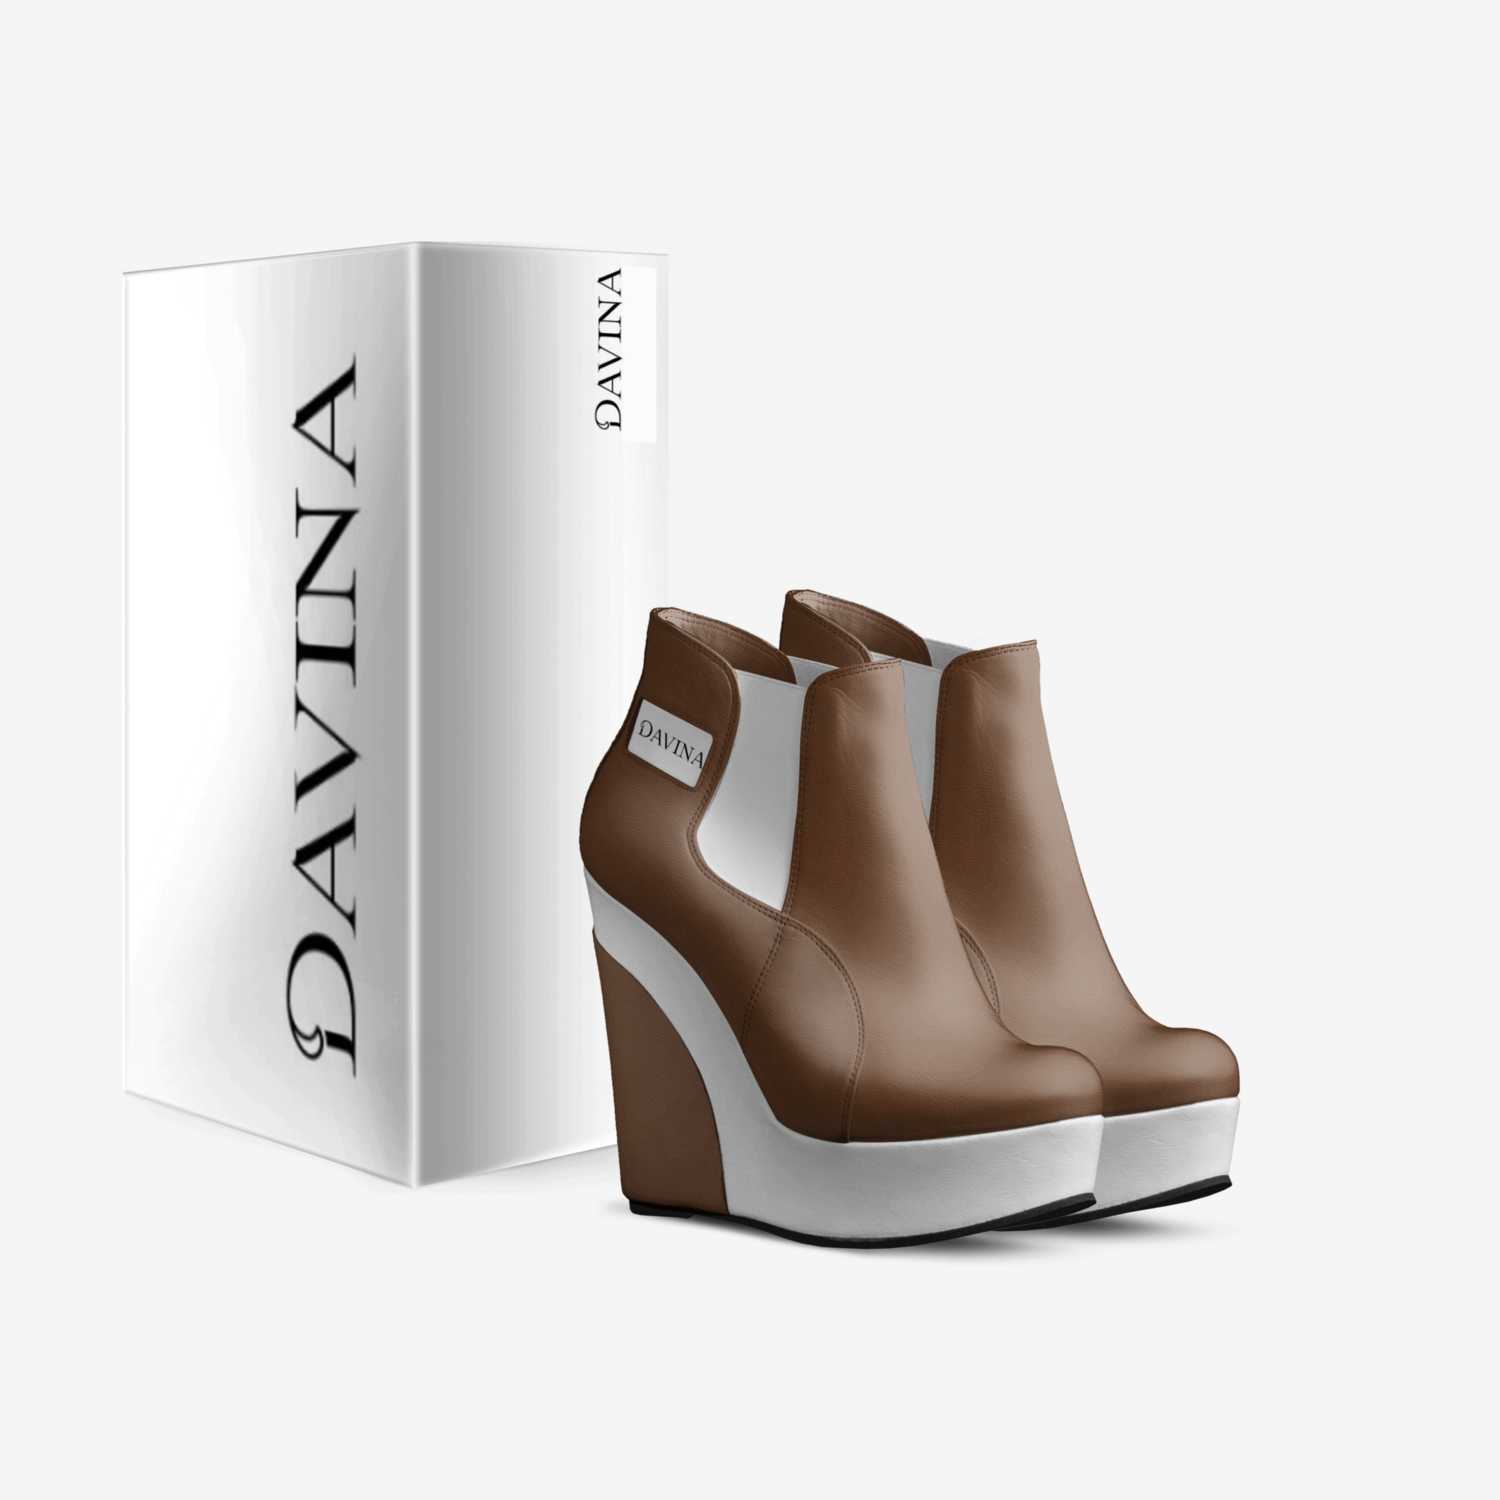 Davina 2 custom made in Italy shoes by Knowledgejuelzbrown | Box view